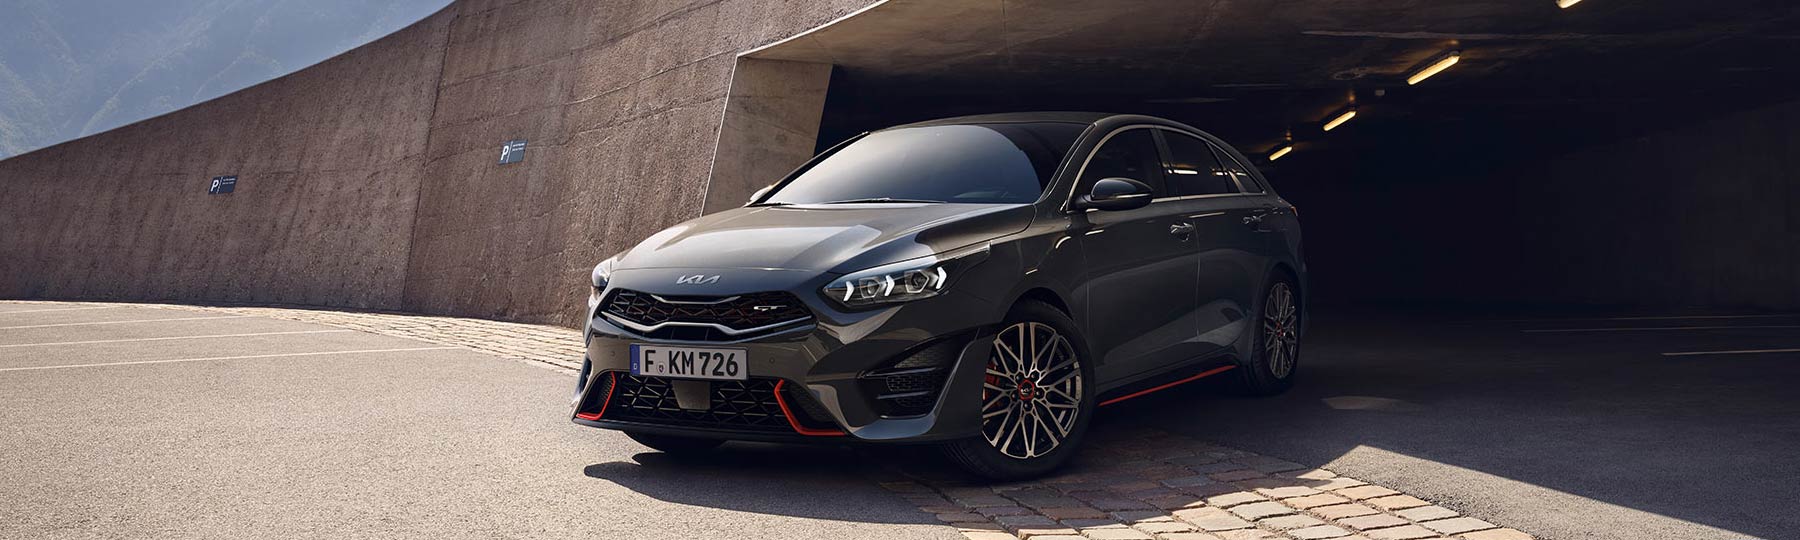 Kia ProCeed Personal Contract Hire Offer